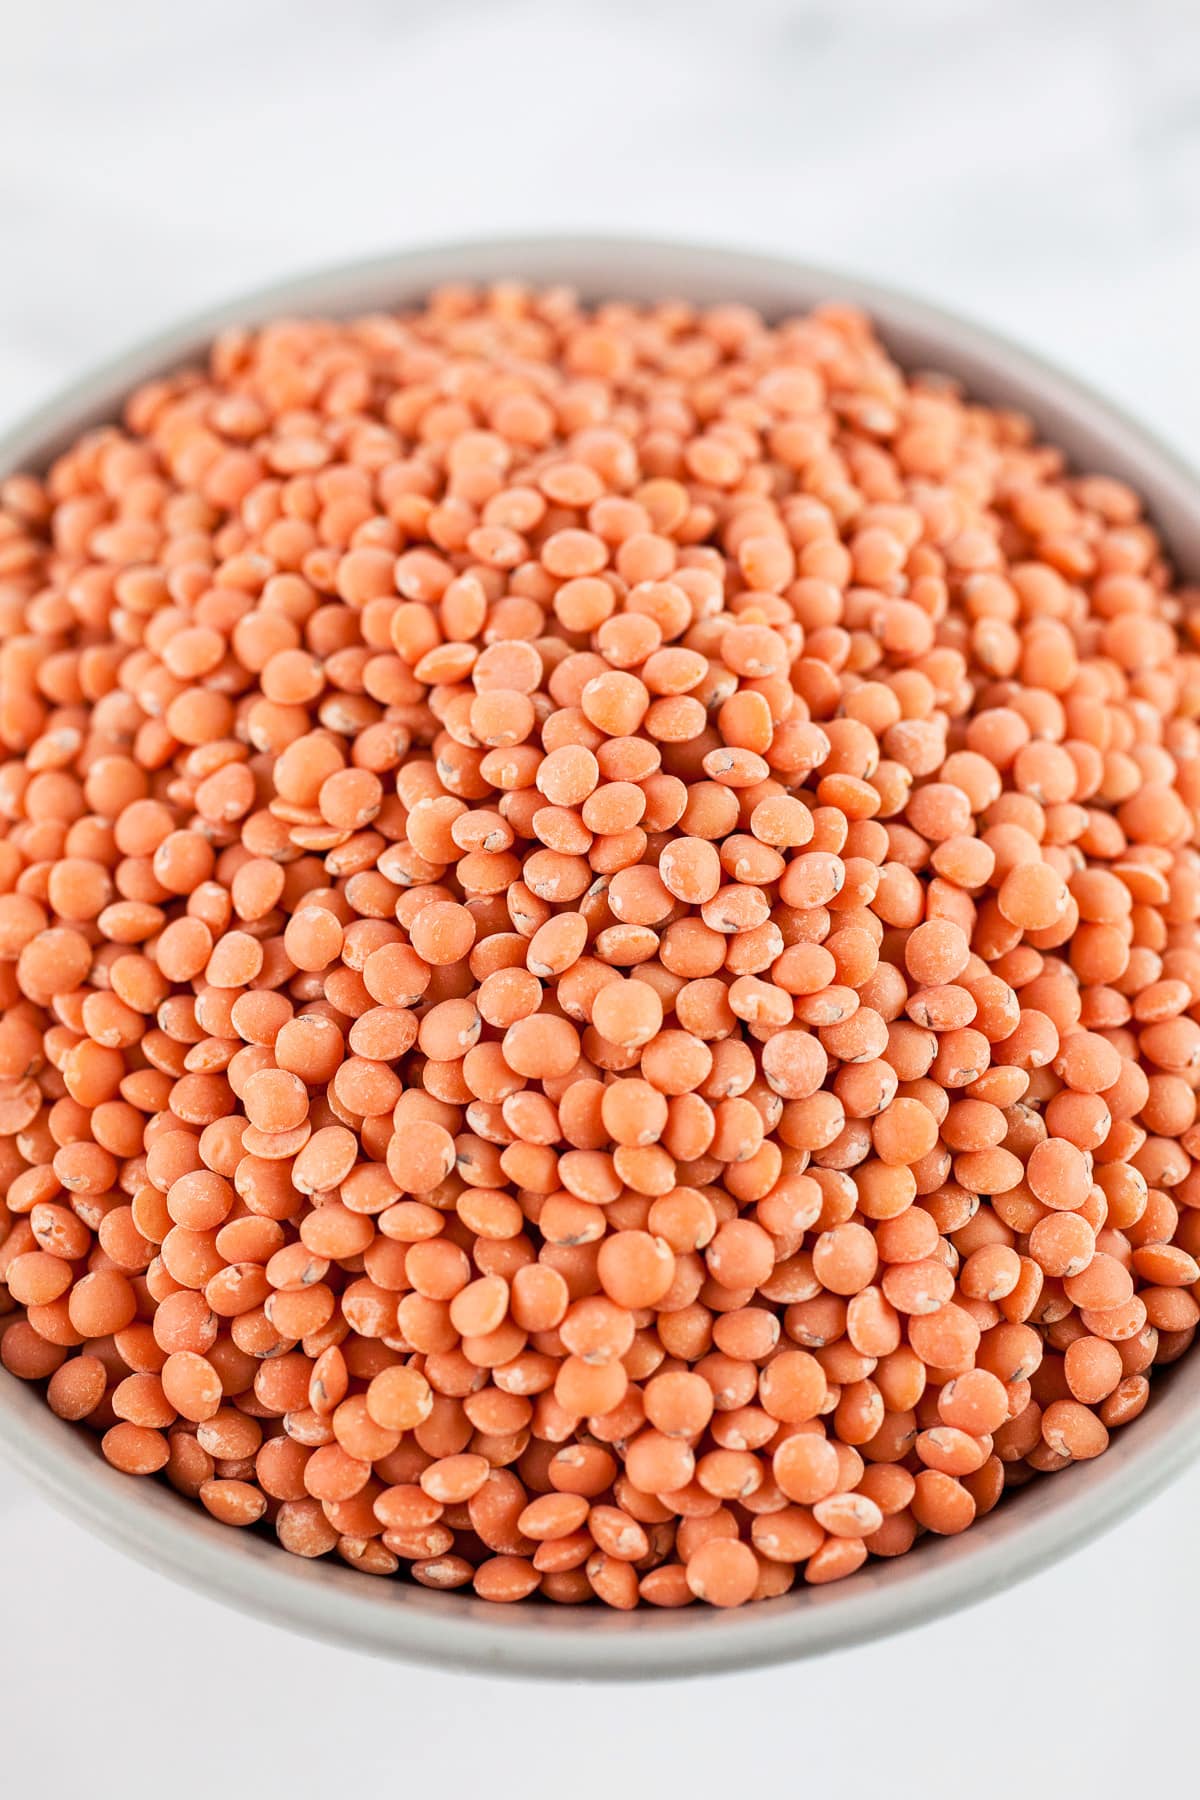 Uncooked red lentils in small grey bowl.